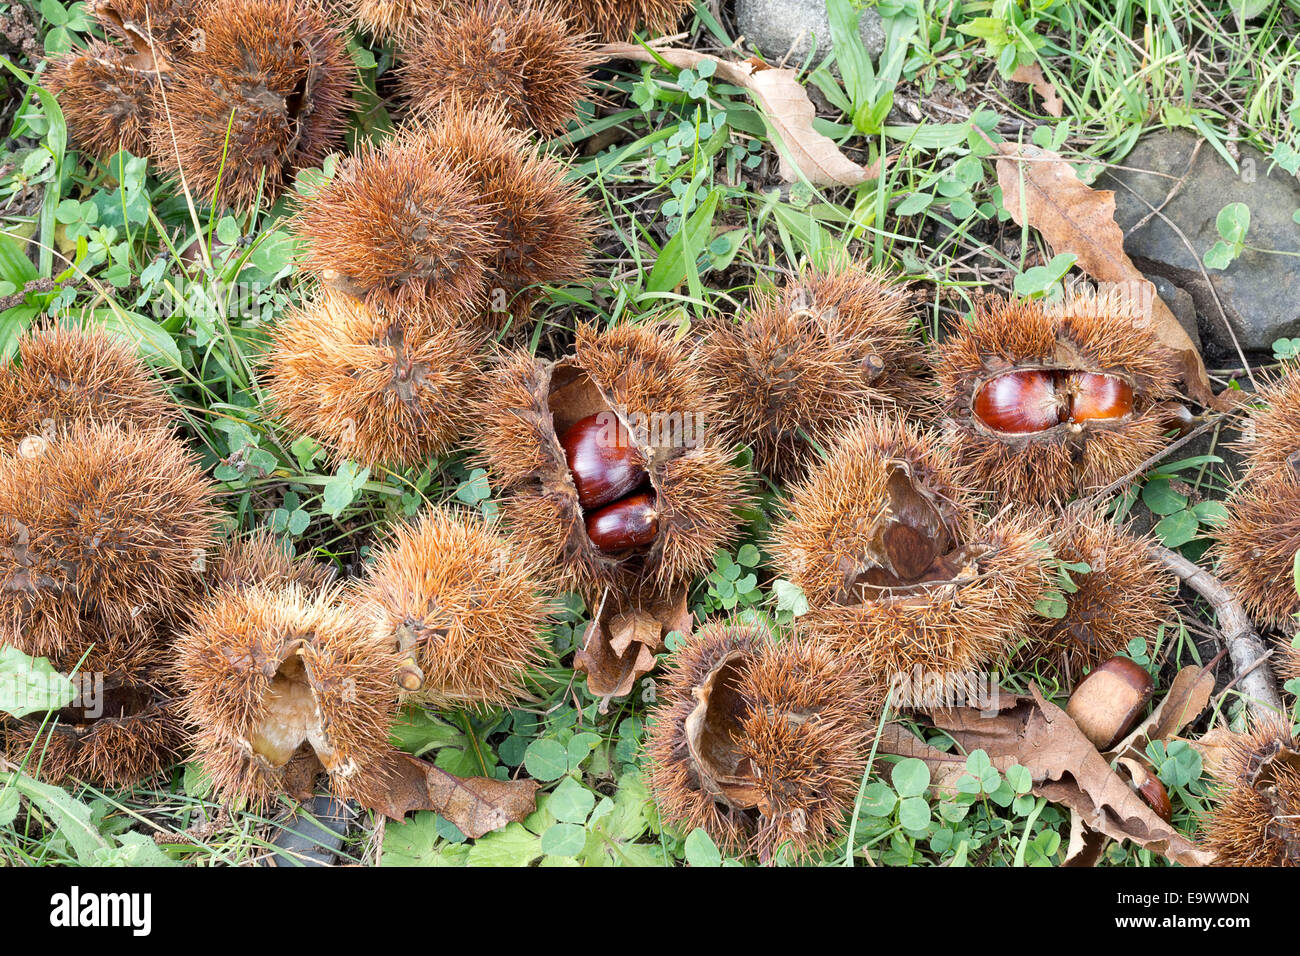 Sweet chestnuts. For flour or roasting. Stock Photo